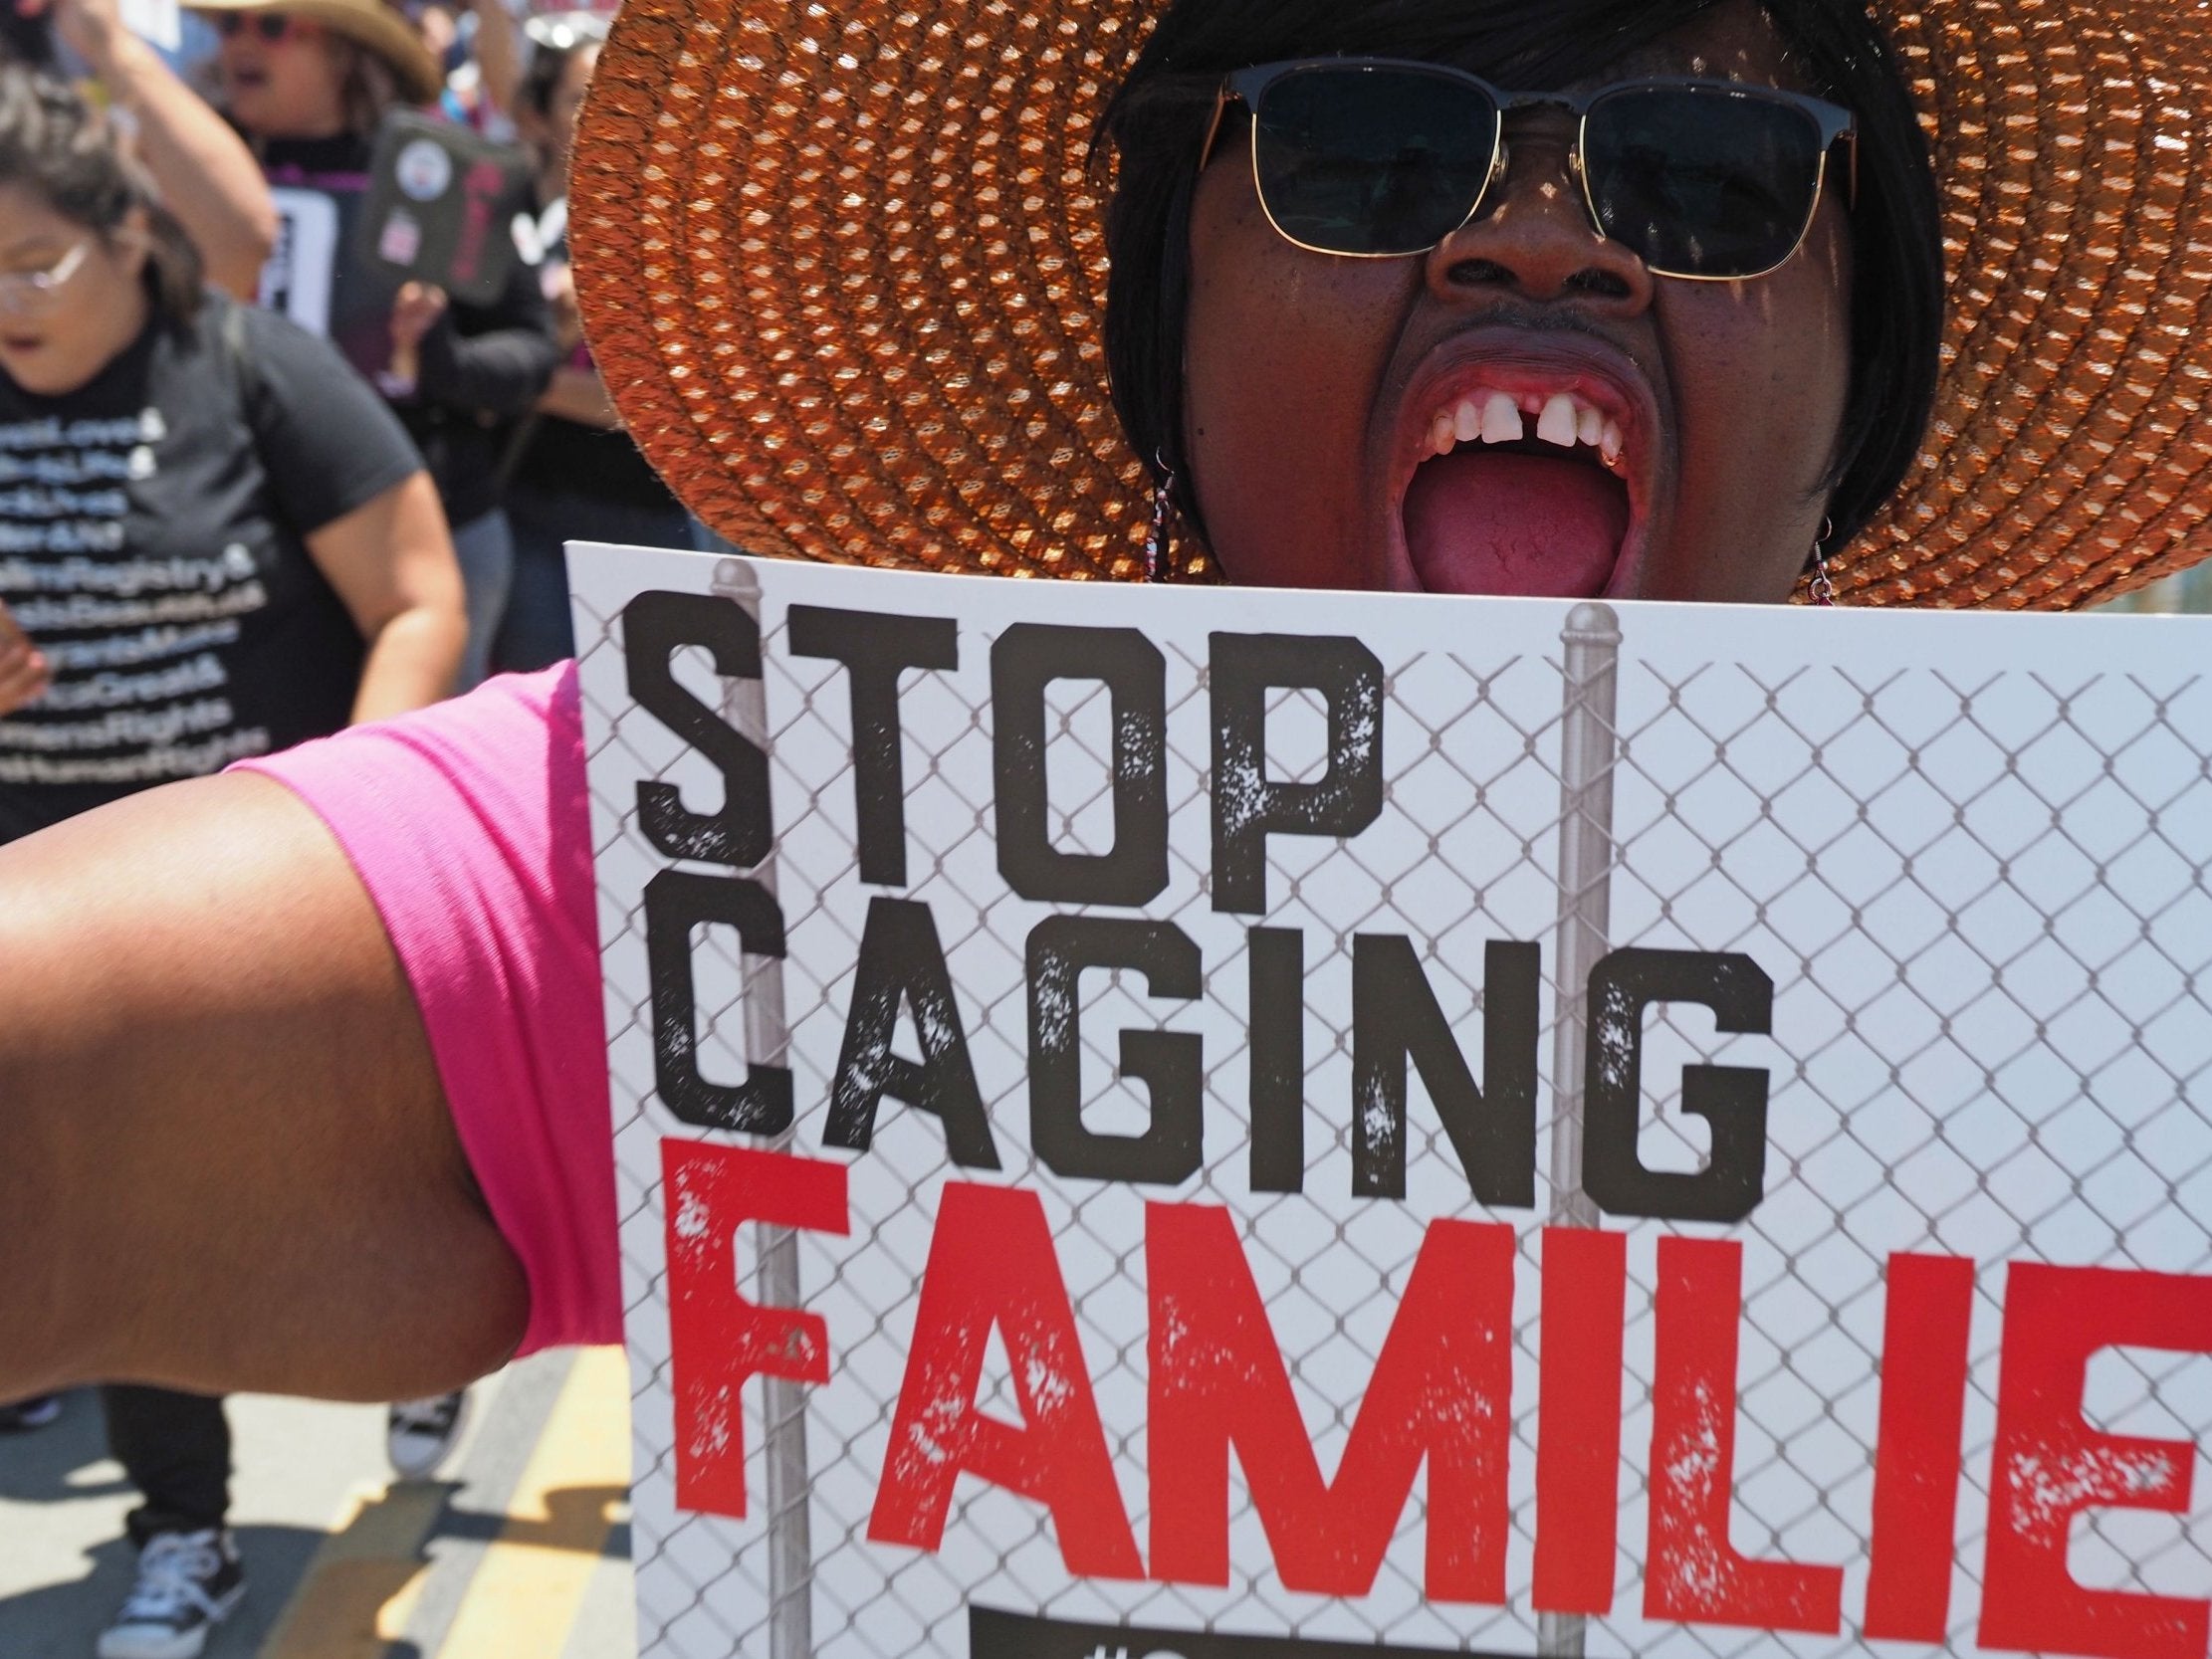 US 'zero tolerance' immigration policies that separated families sparked intense backlash in the US